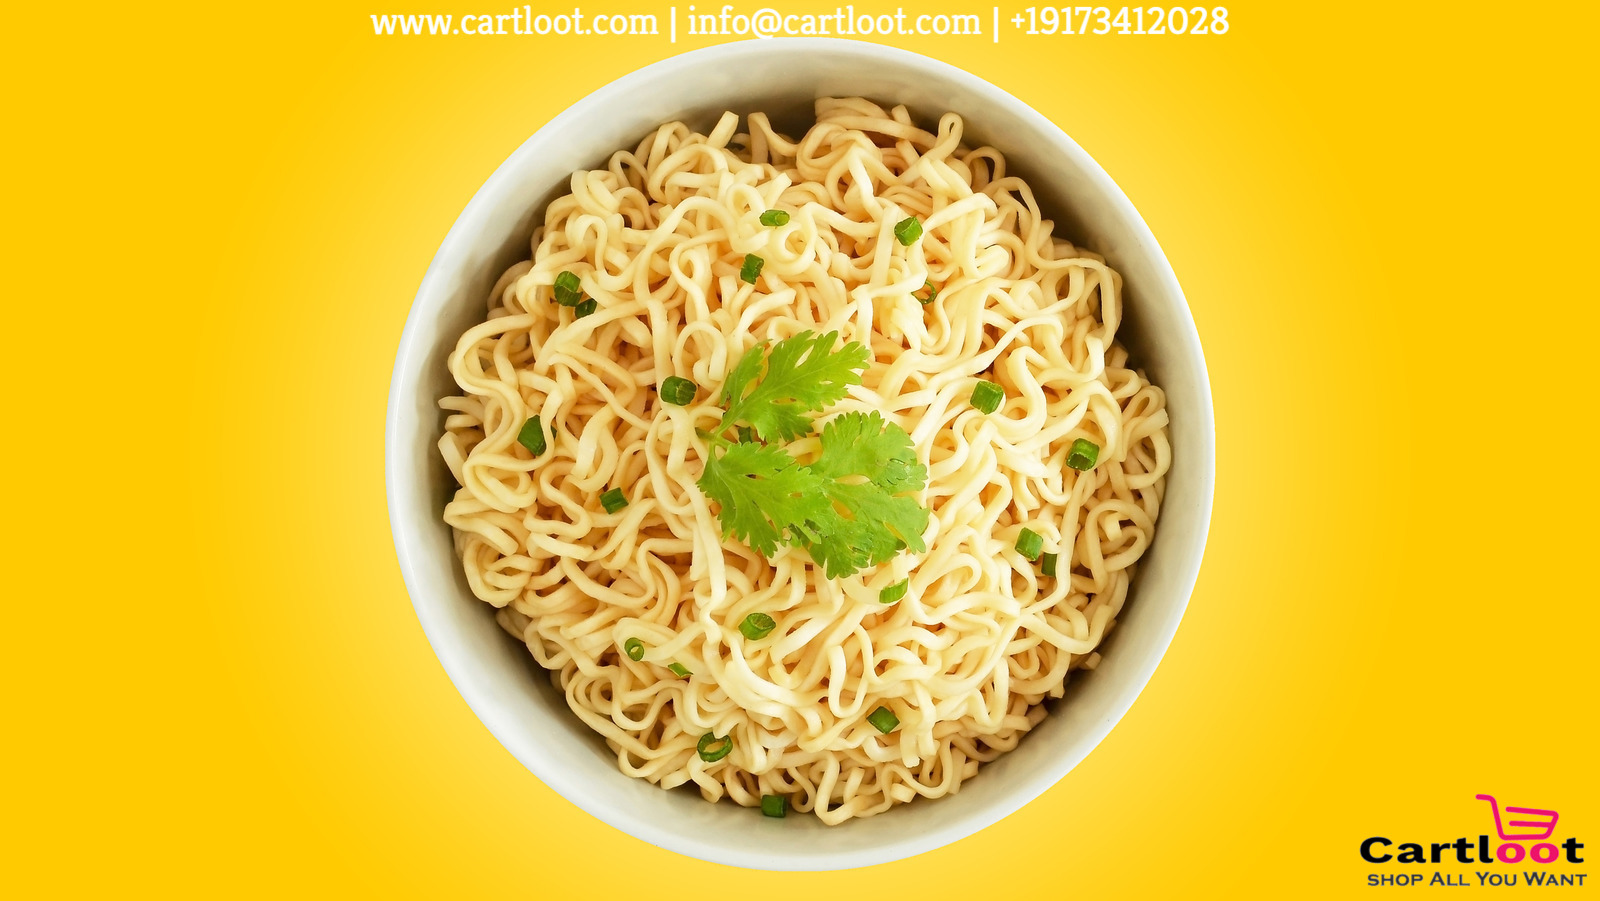 Types of delicious instant noodles